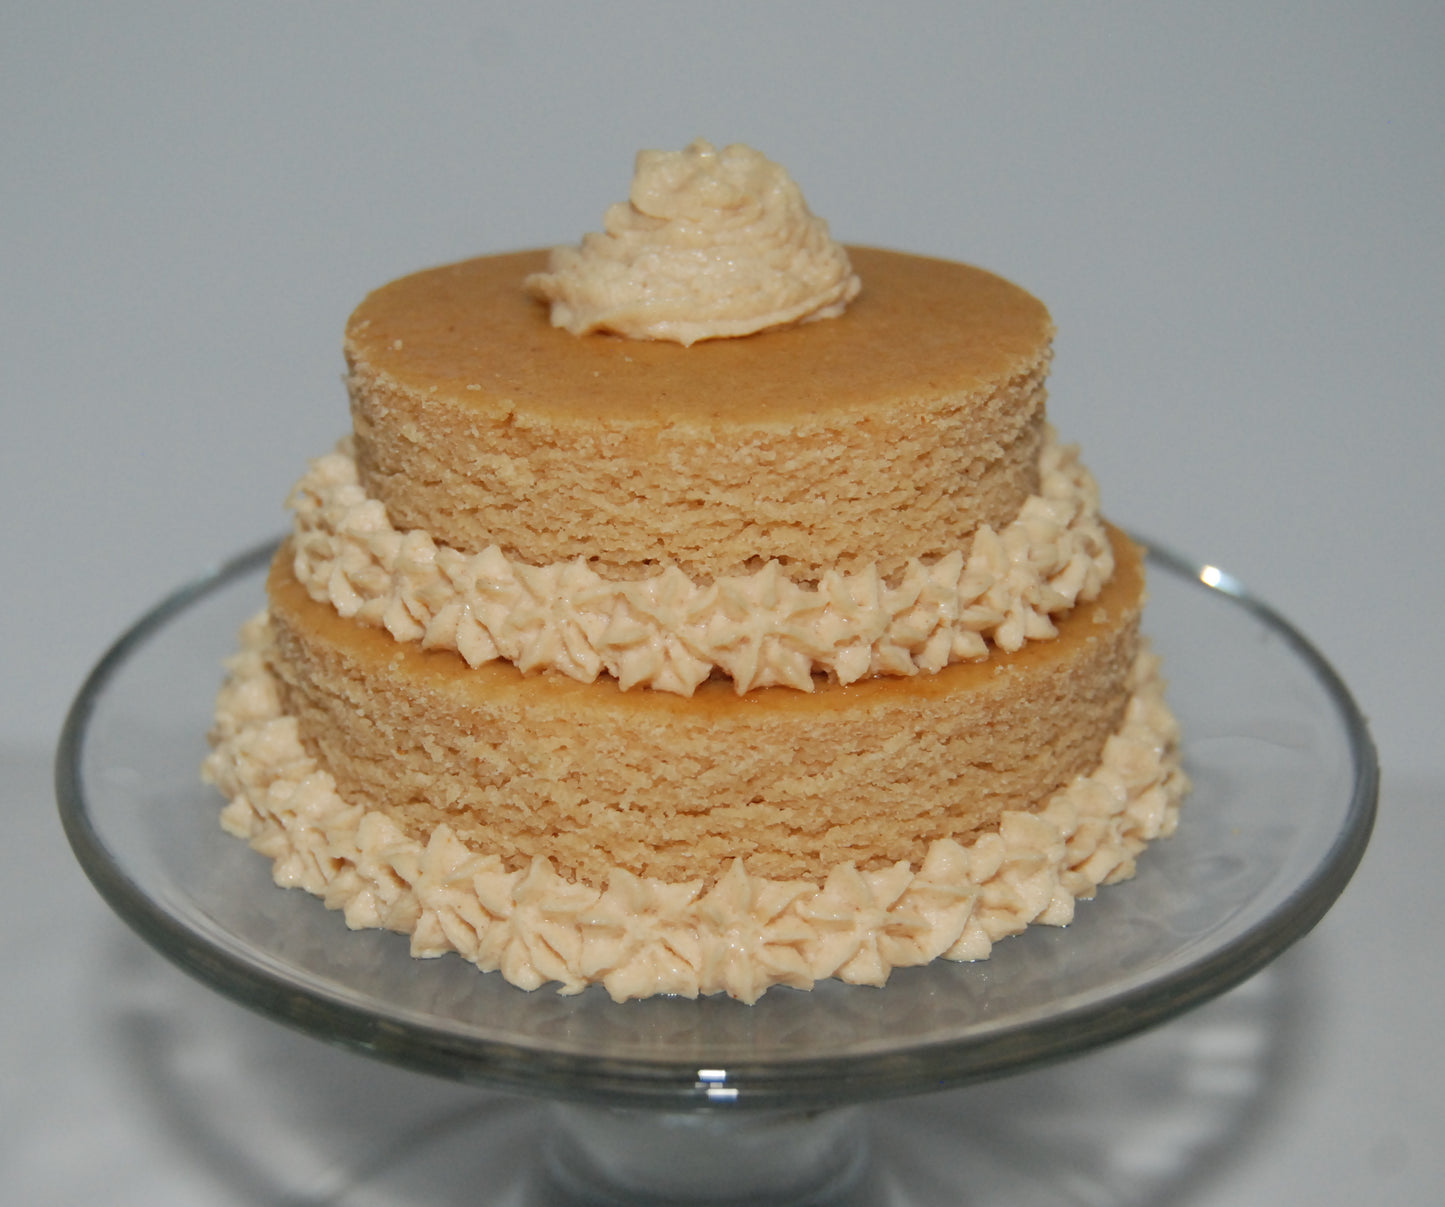 Naked cake made with peanut butter.